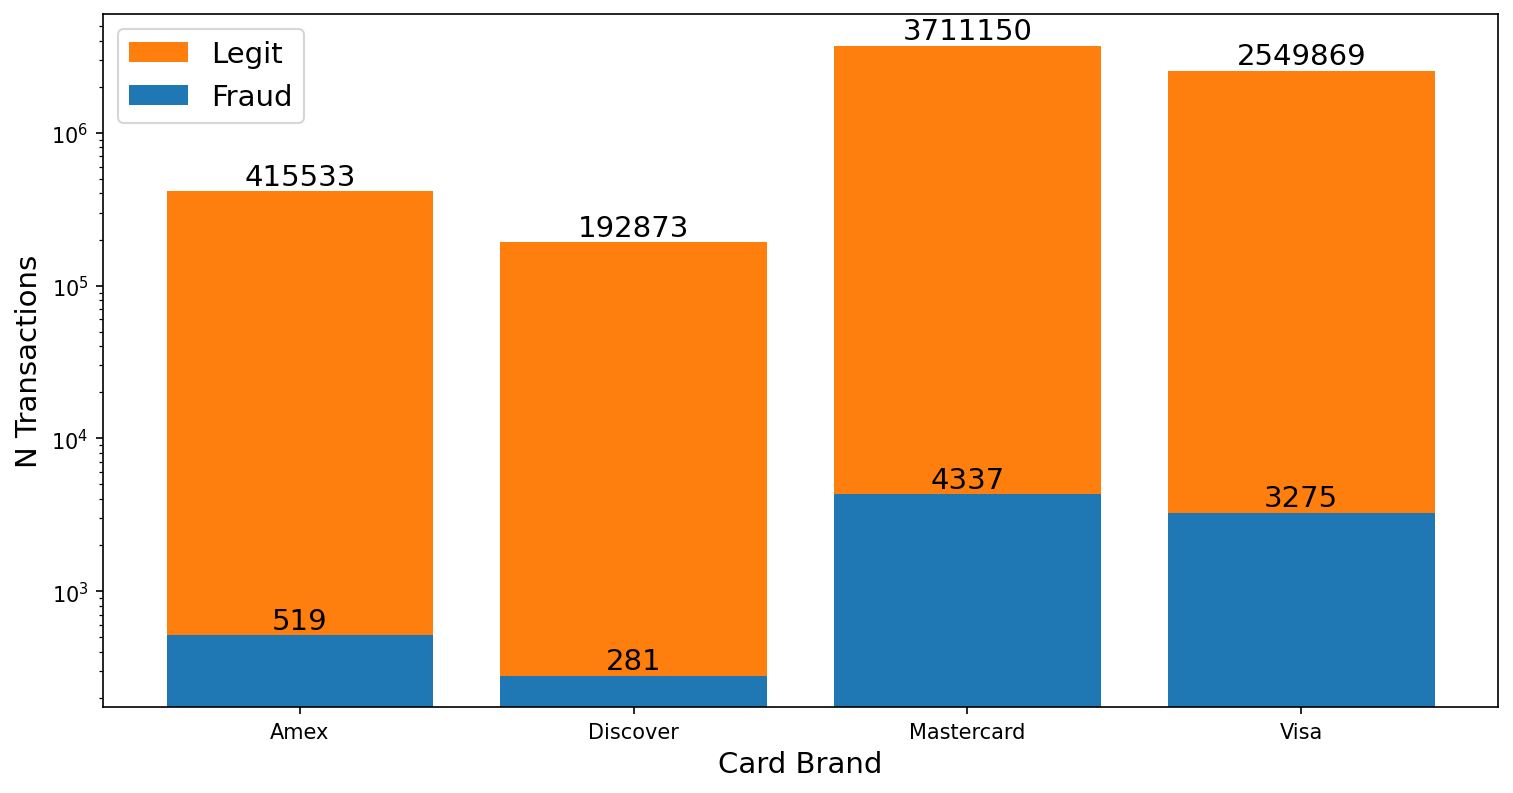 Bar plots of all legitimate and fraudulent transactions grouped by the company each credit card was issued by (Amex, Discover, Mastercard, Visa).